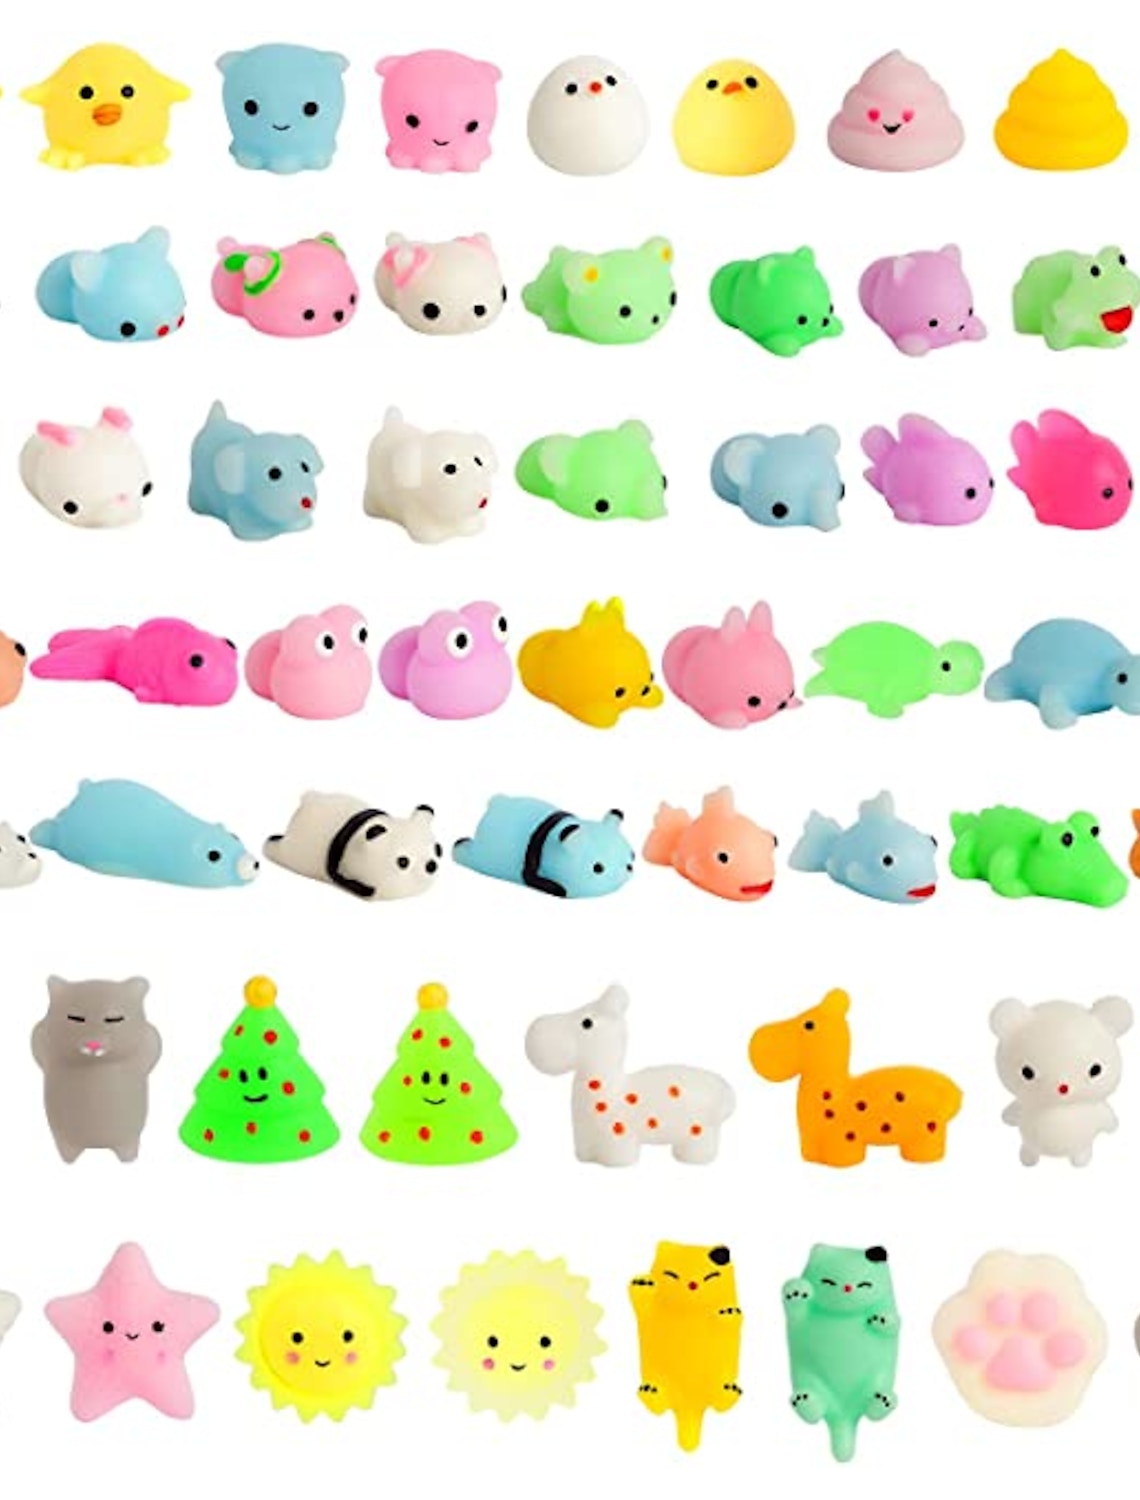 Goodie Bag Classroom Prize Animal Squishies Stress Relief Toys for Boys & Girls Birthday Gifts Mochi Squishy Toys 100 Pack Mini Stress Relief Kids Toys for Party Favors 